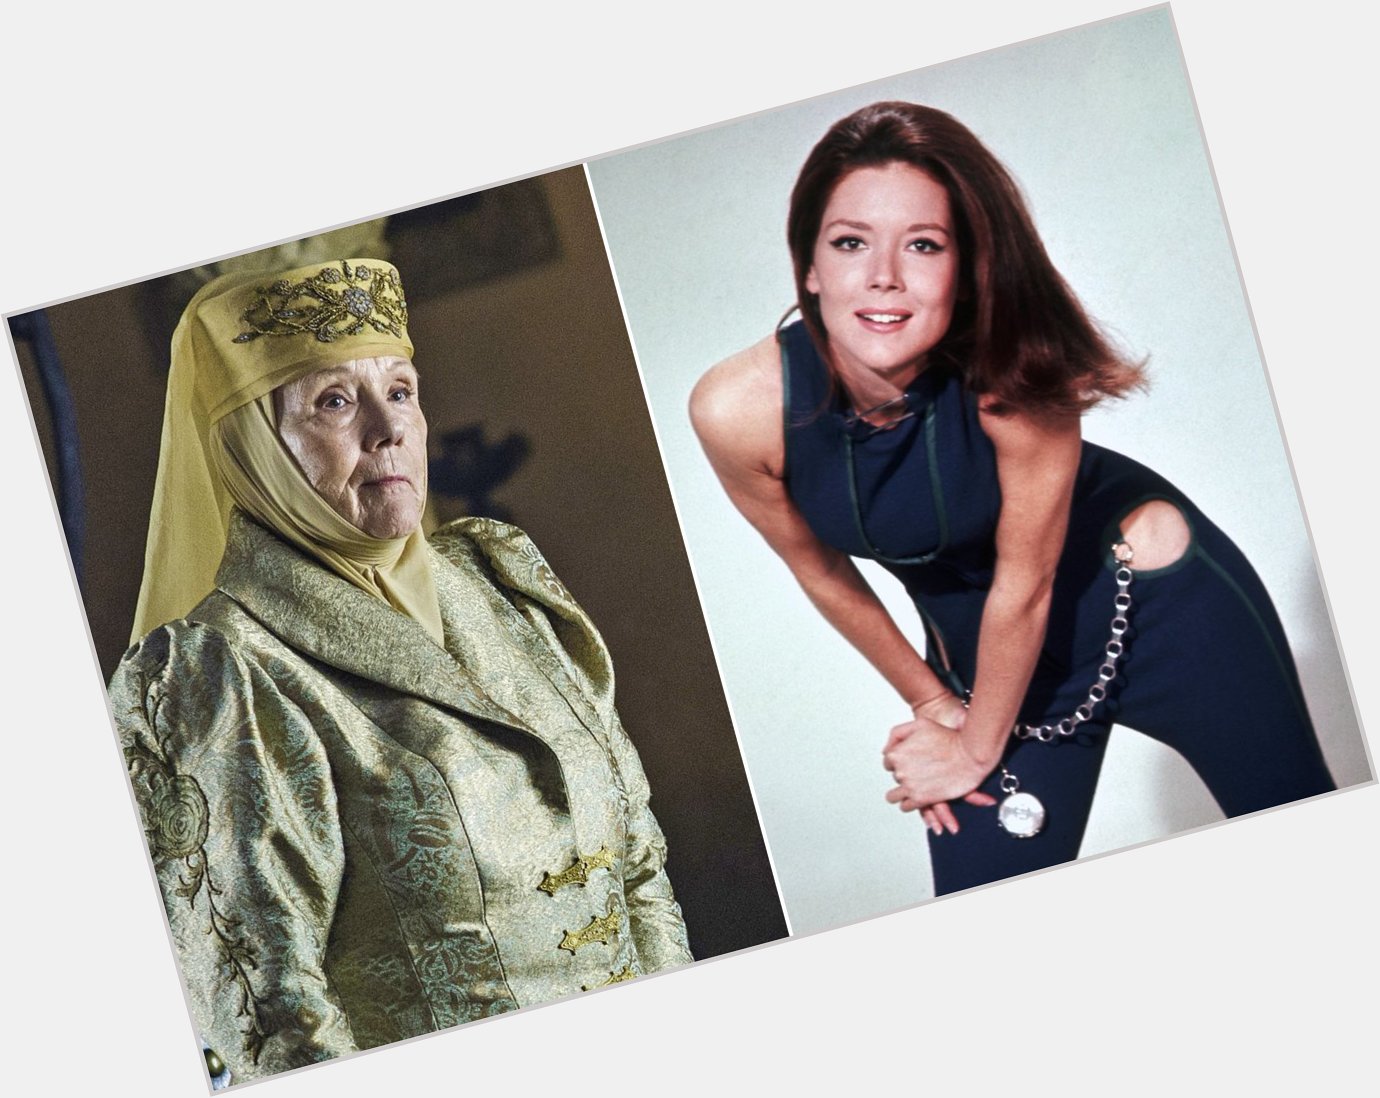 Happy Birthday Dame Diana Rigg
From Bond girl to Game Of Thrones 